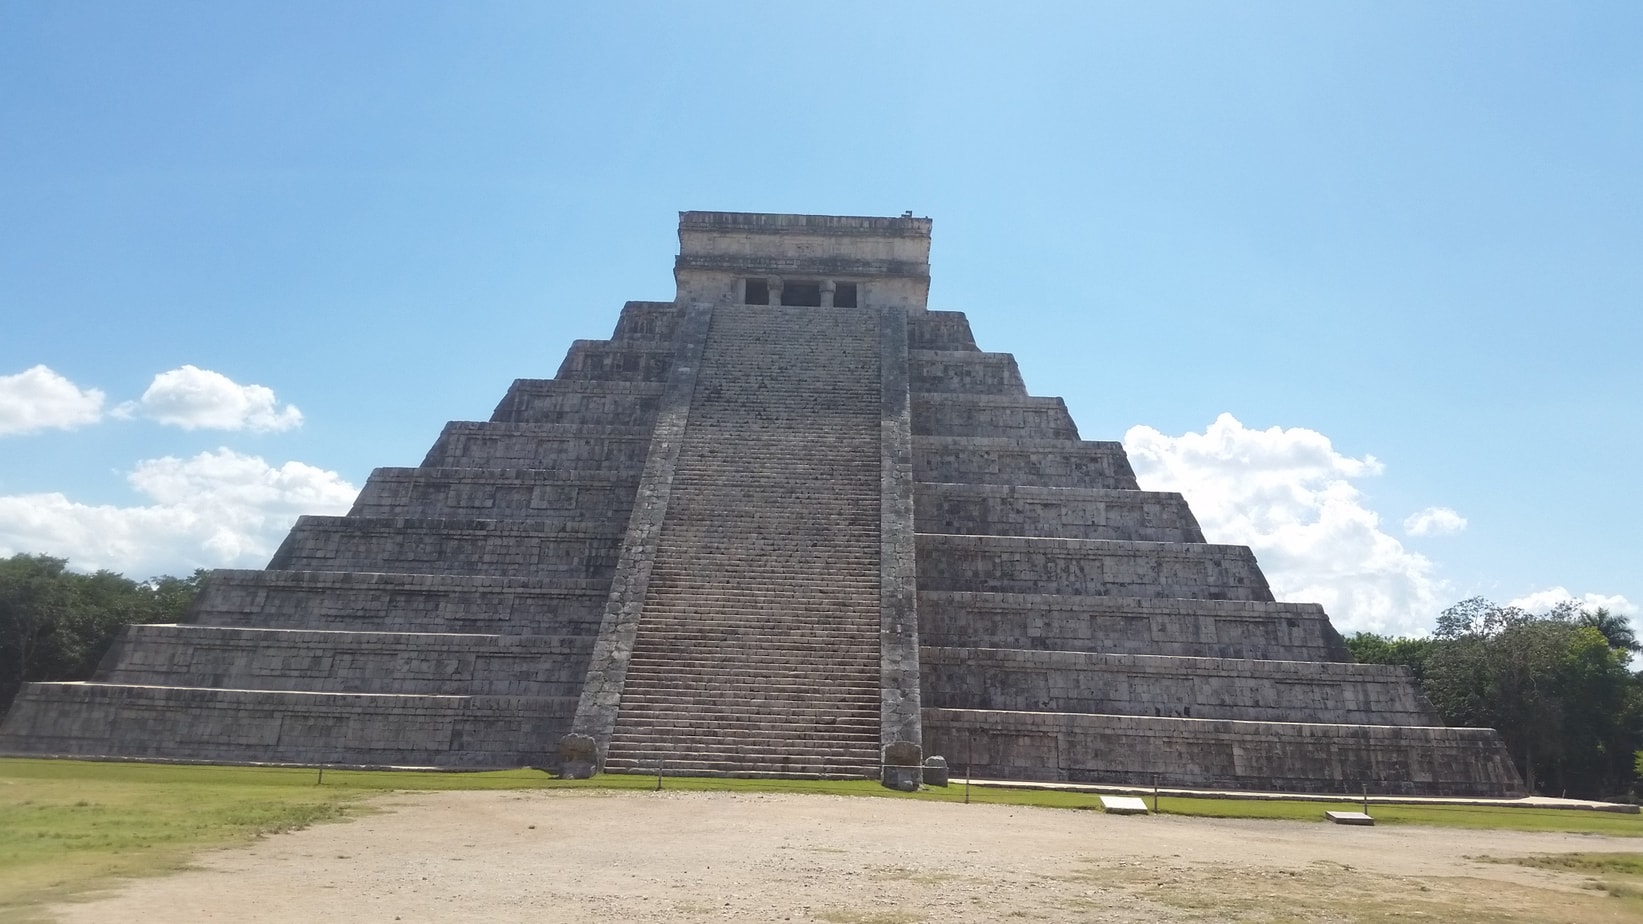 A trip to Chichén Itzá, one of the 7 Wonders of the World.